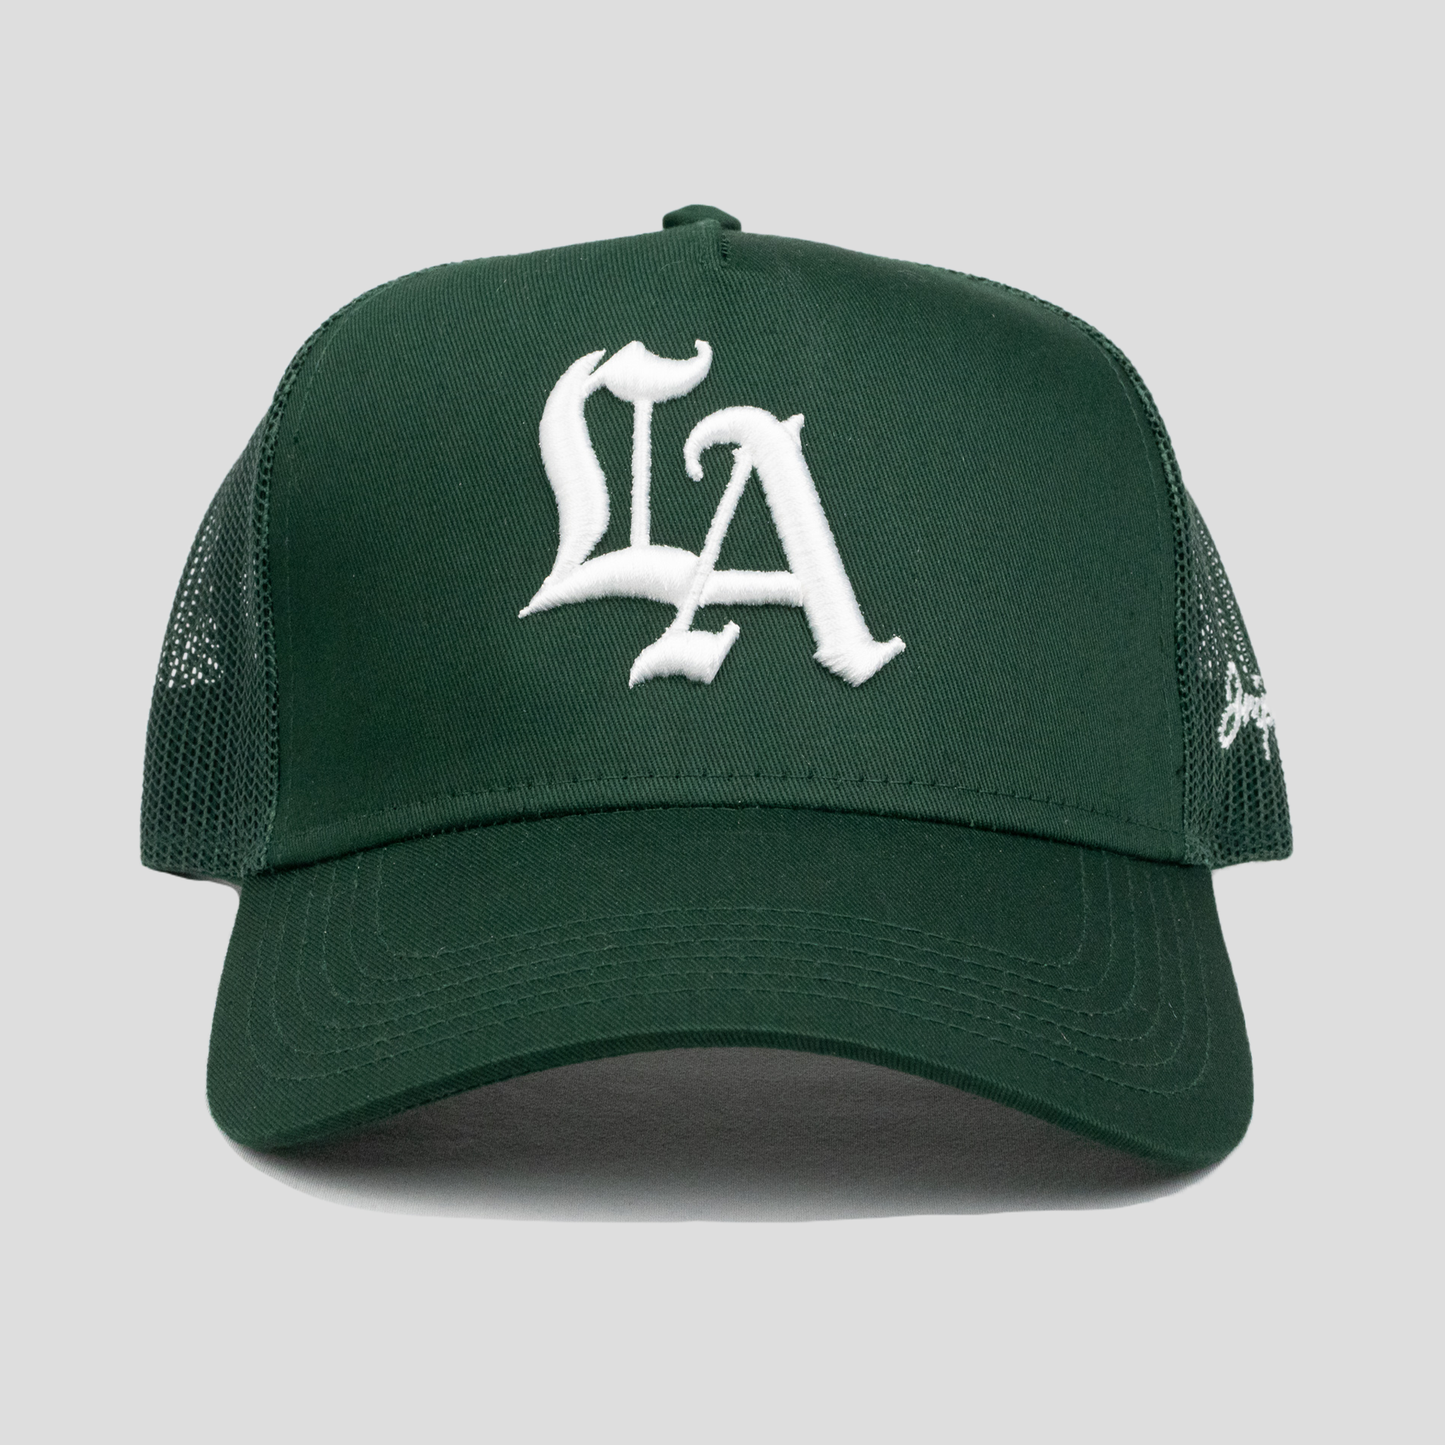 Old English LA Structured Trucker Hat (GREEN)